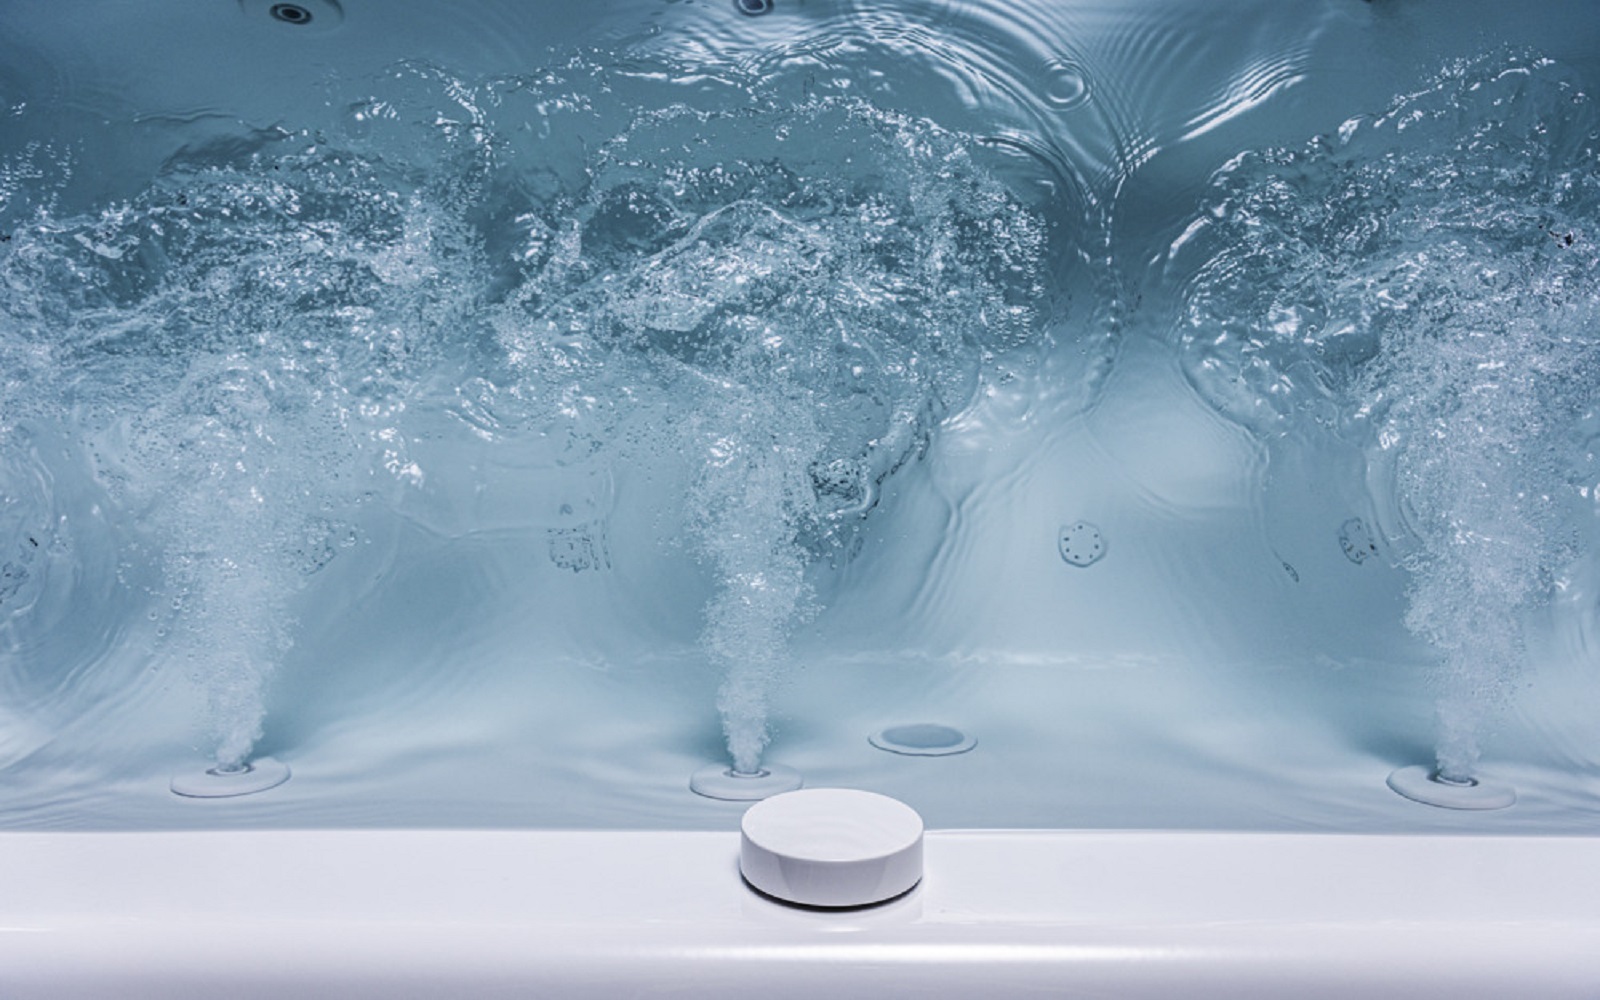 water jets massage in the new Kaldewei Whirl system for the bath